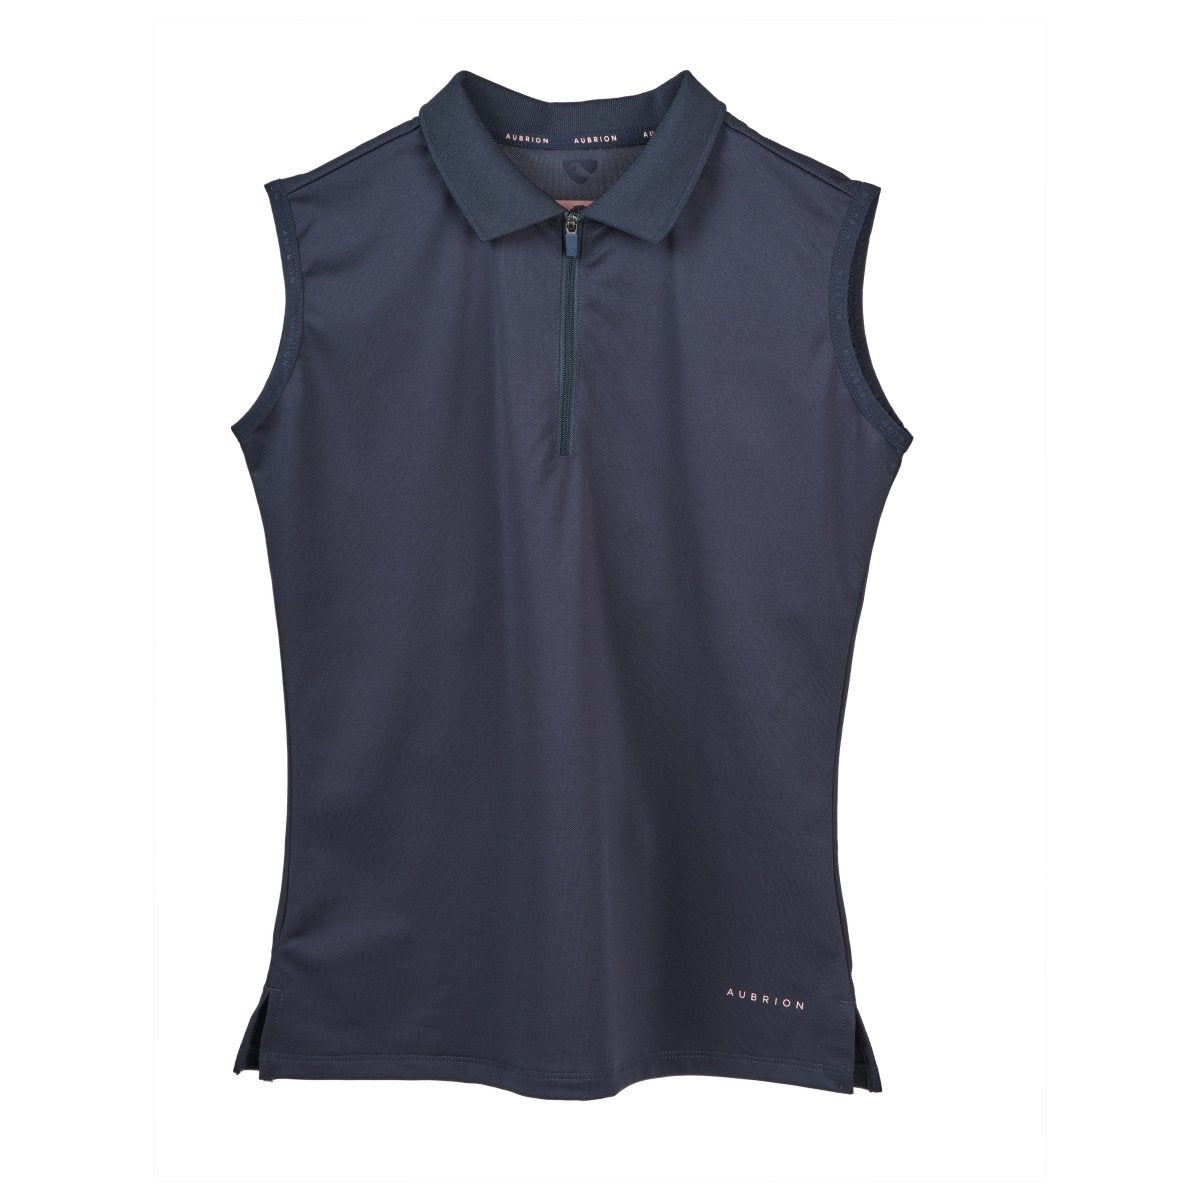 Aubrion Poise Sleeveless Tech Polo - Young Rider - Navy - 11/12 Yrs